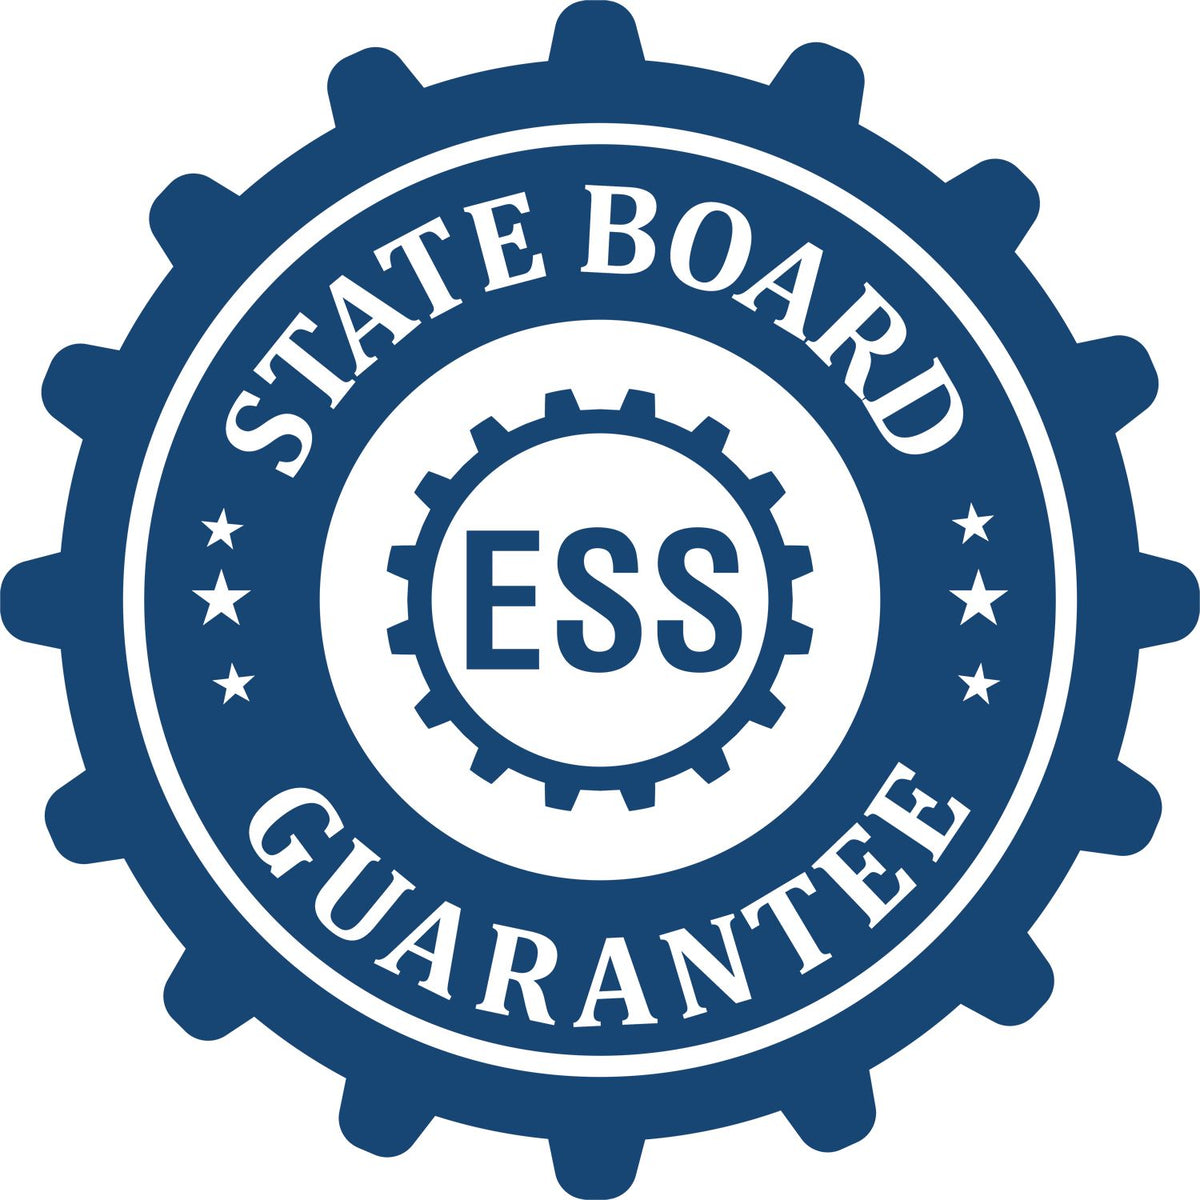 An emblem in a gear shape illustrating a state board guarantee for the Idaho Desk Architect Embossing Seal product.